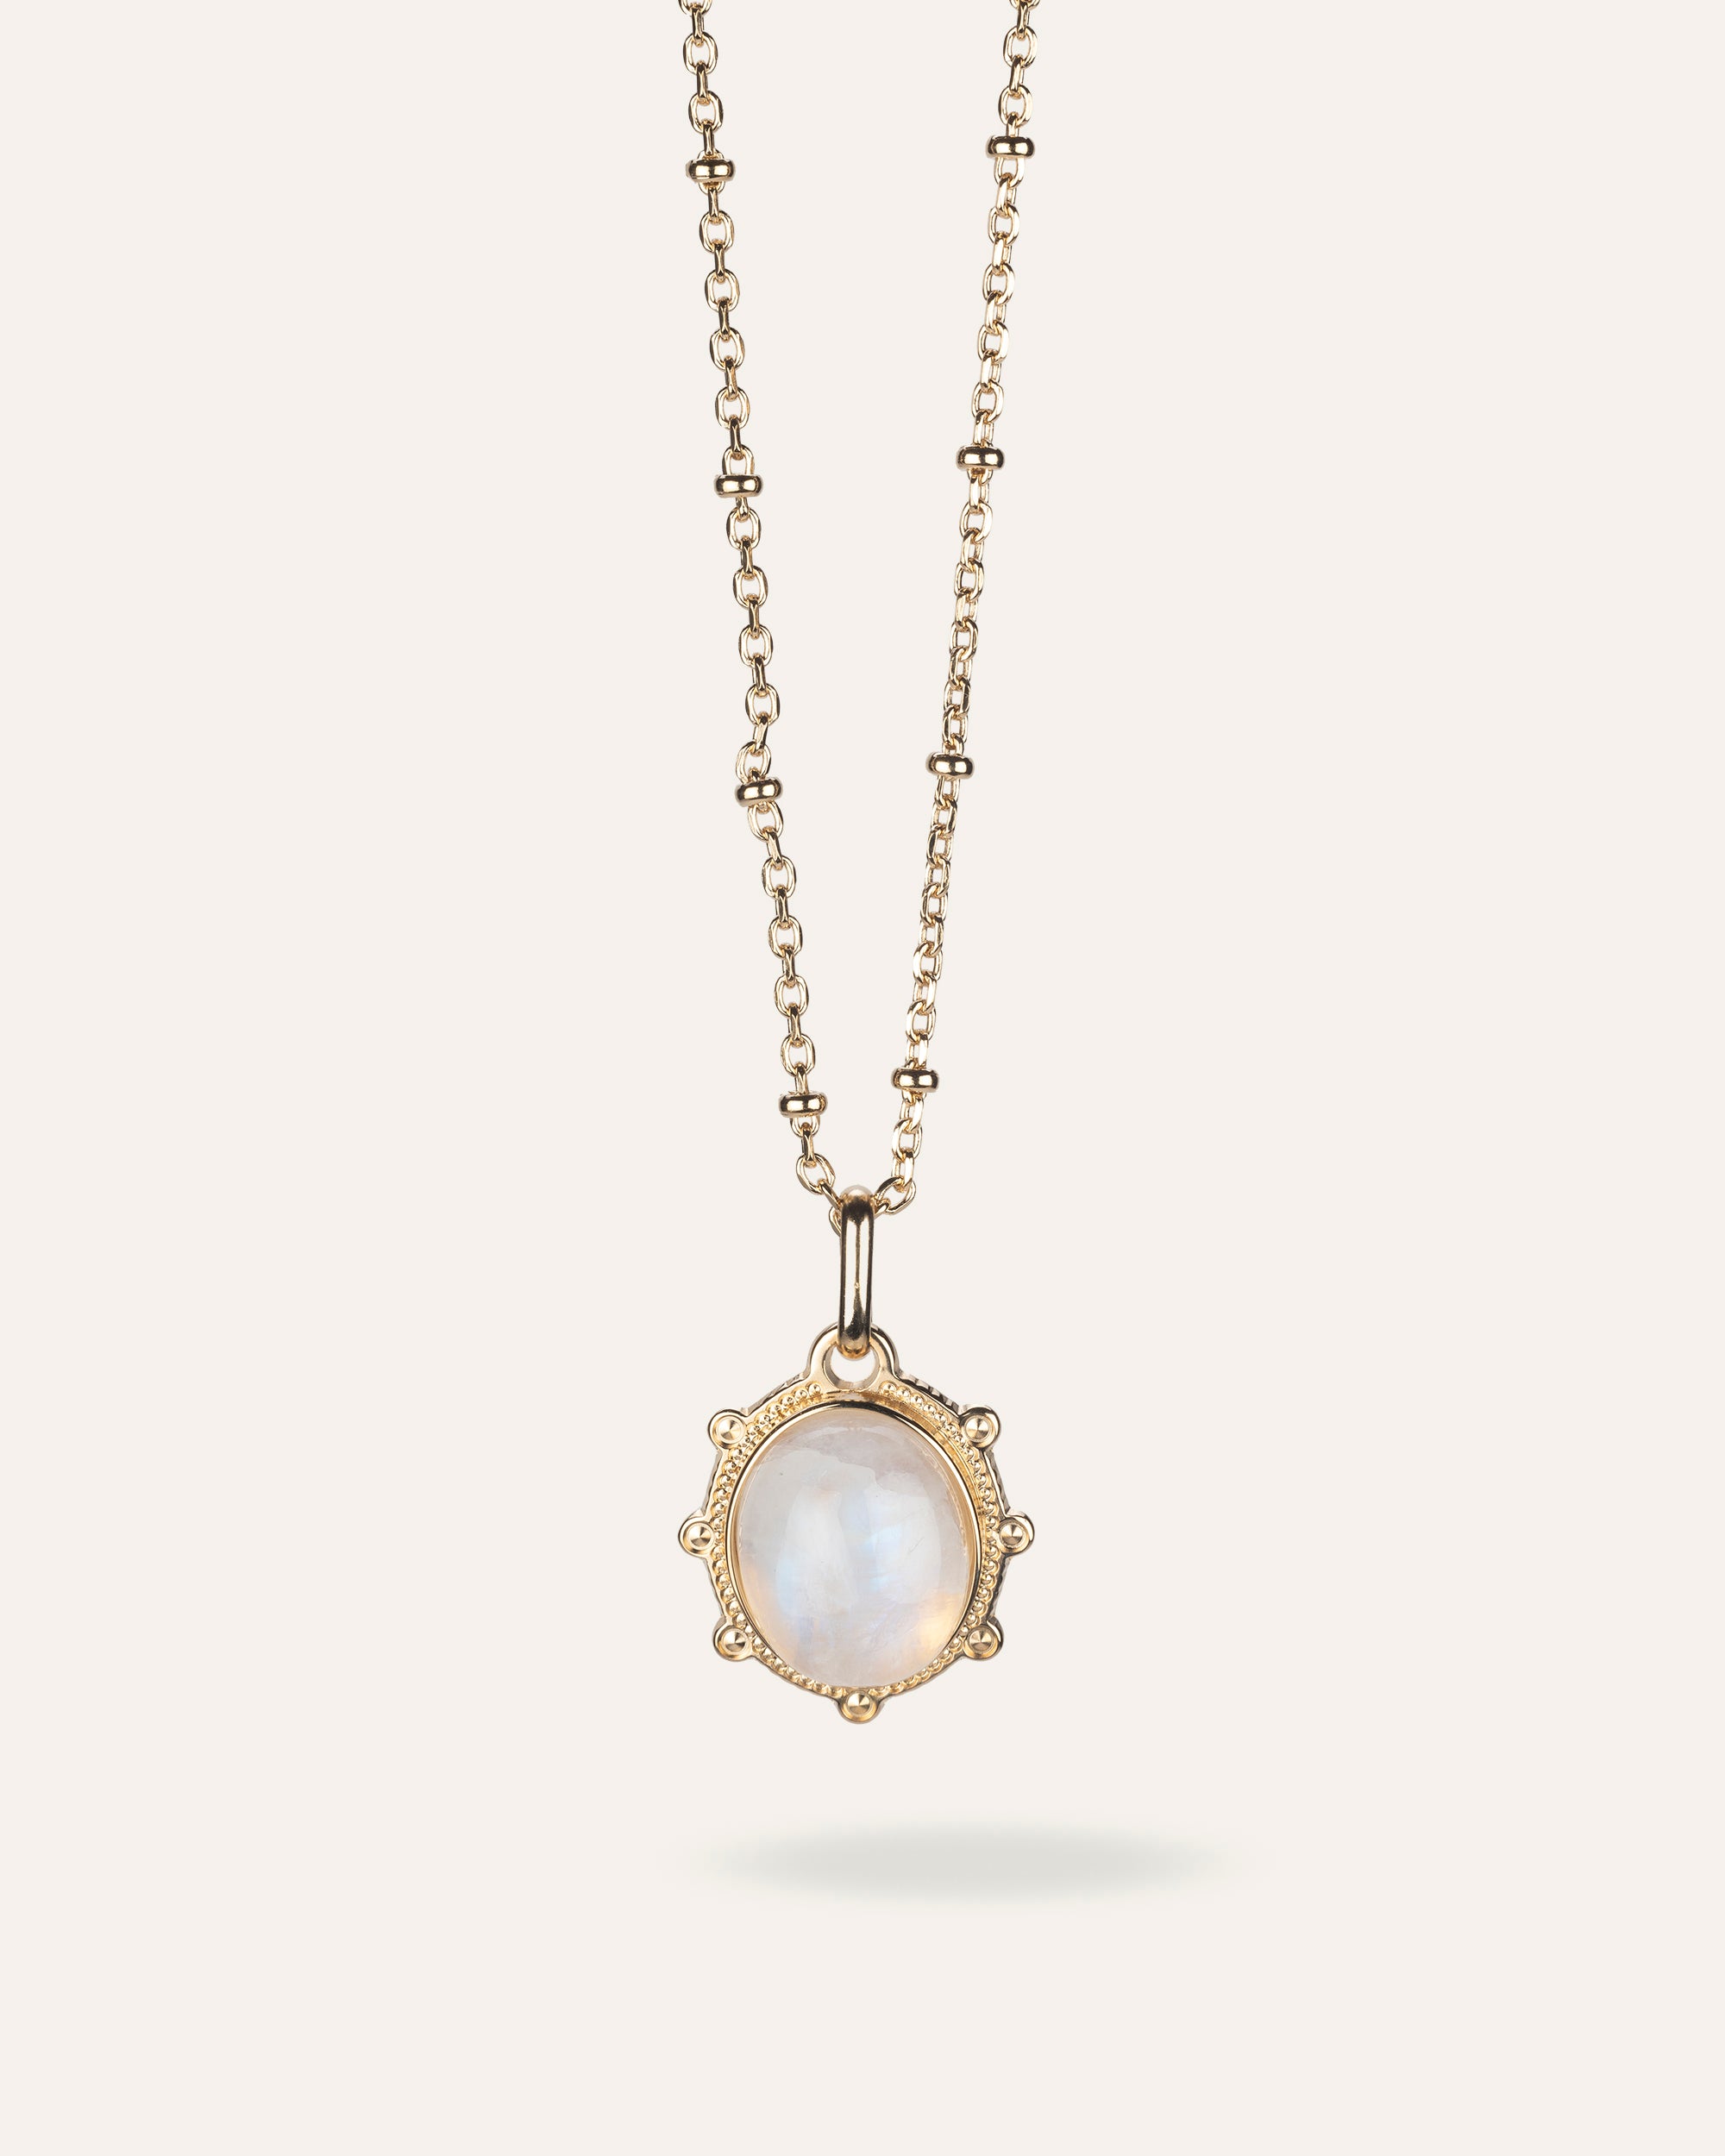 Tara gold and moonstone necklace